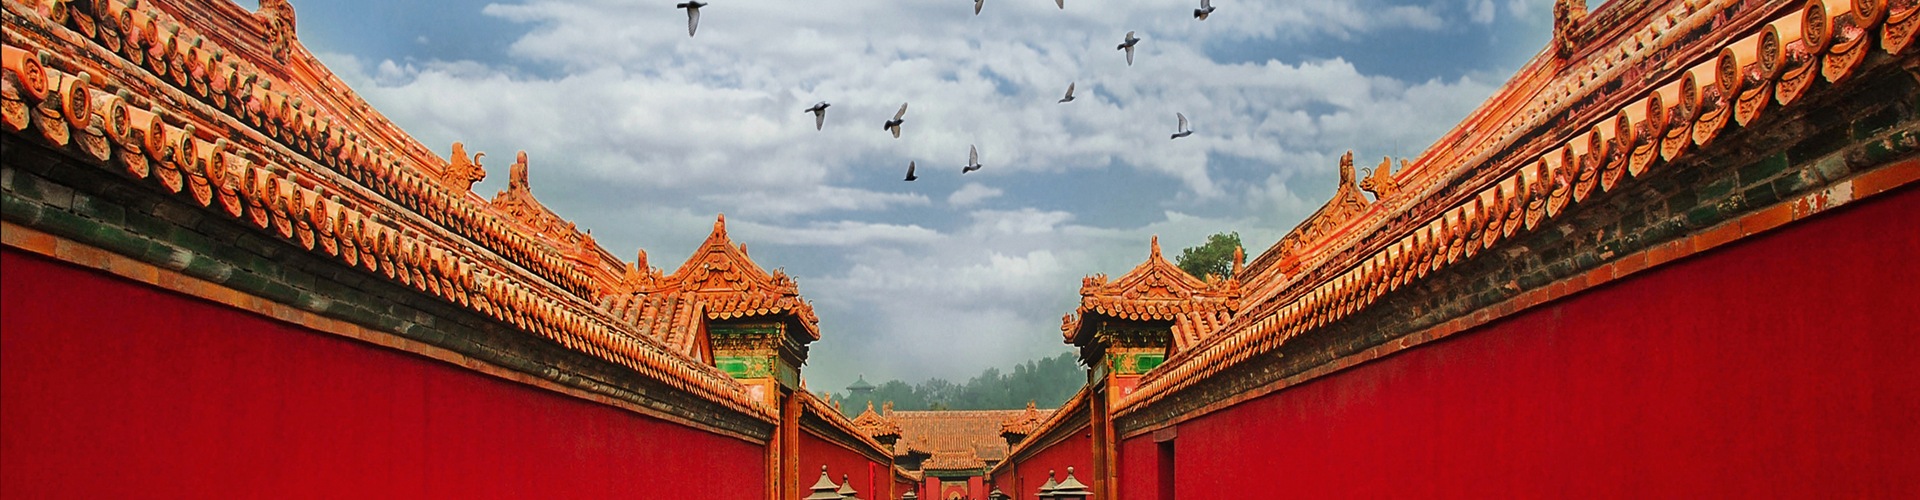 10 Tips for Visiting the Forbidden City